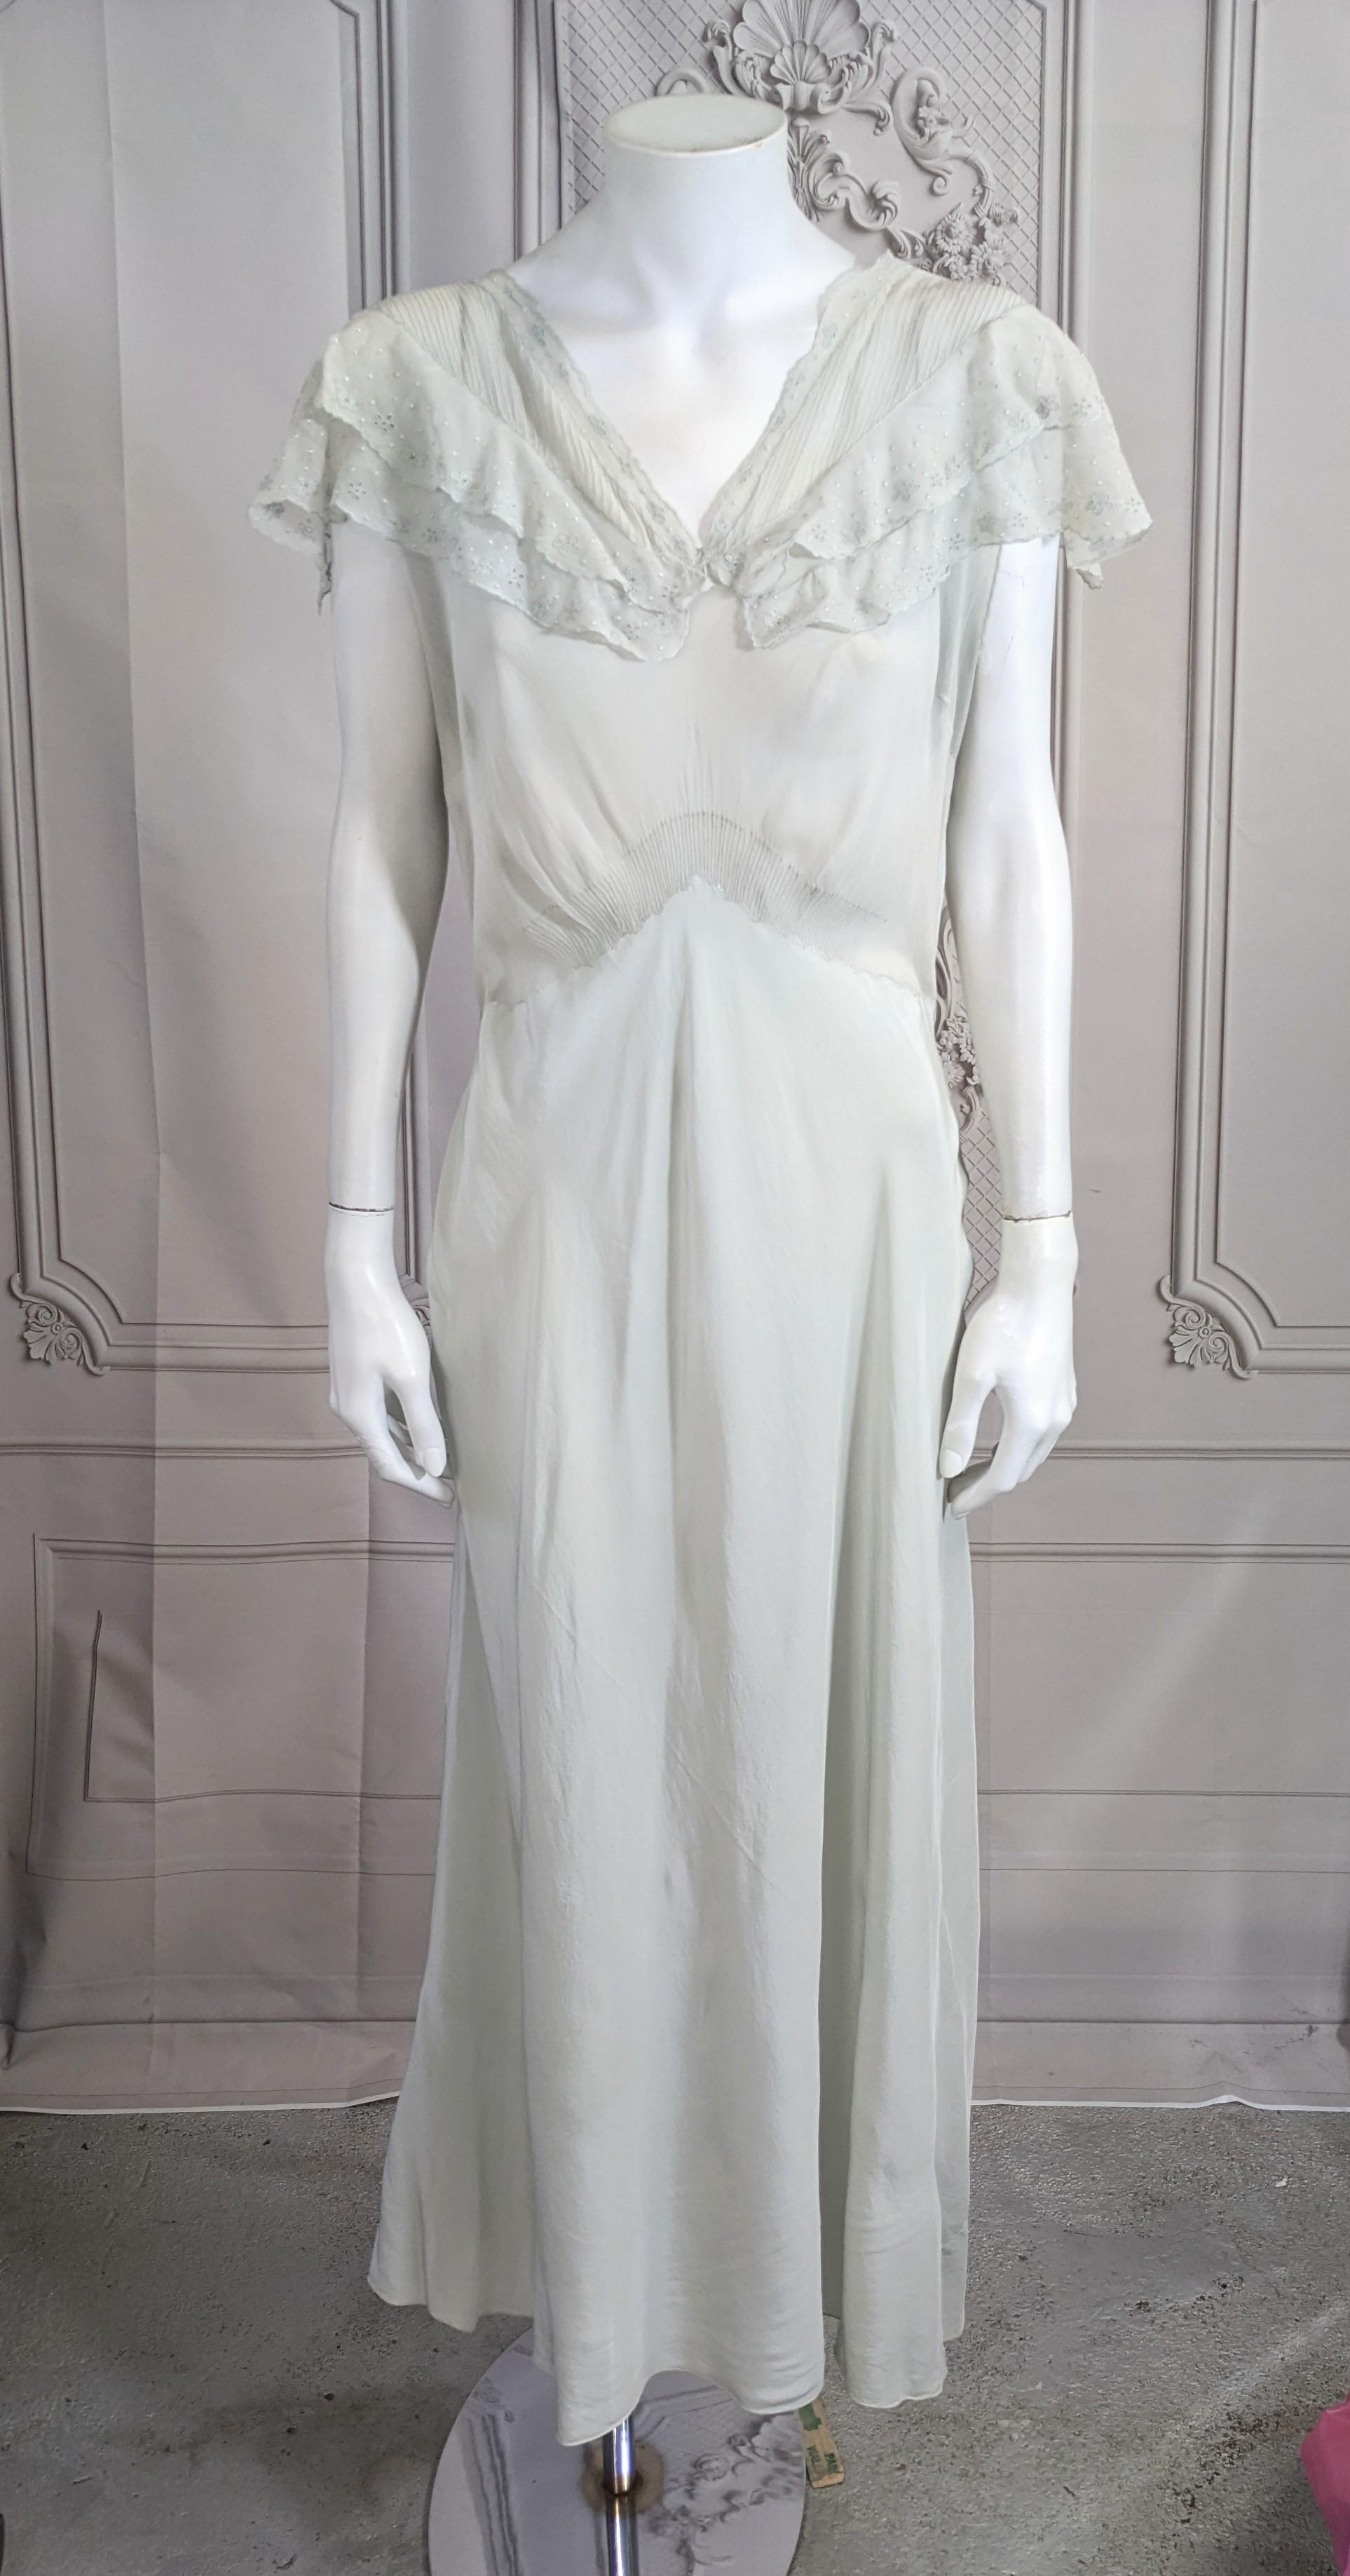 Lovely Art Deco Hand Embroidered Silk Chiffon and Crepe Slip Dress from the 1930's. Sheer chiffon bodice with double ruffle collar and wonderful hand embroidered florals throughout. Extraordinary tiny hand made mini tucks at collar and waist.
Silk